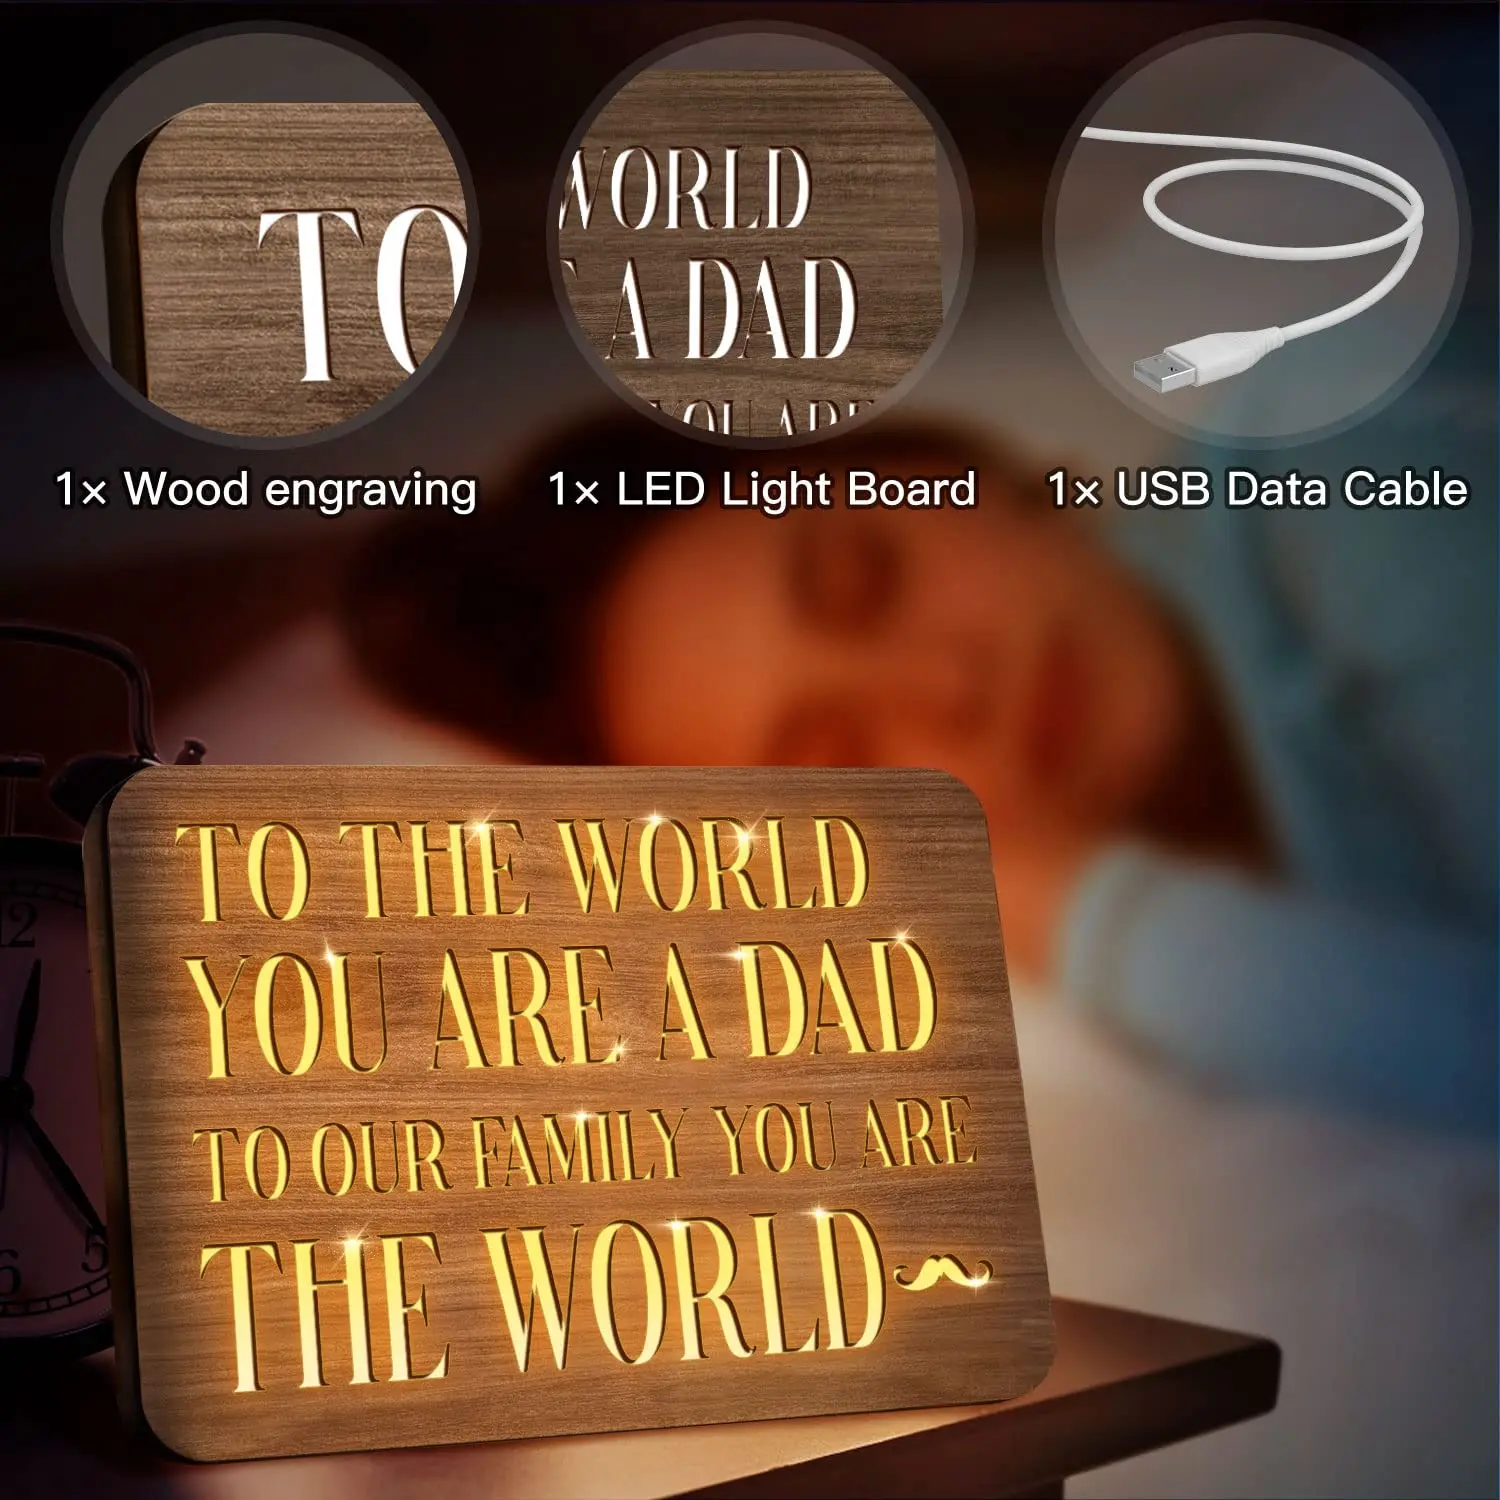 

Best Dad Gifts, Birthday Father's Day Gifts for Dad, Wooden Night Light Sign Plaque with Proverbs - USB Wood Carving Sleep Lamp